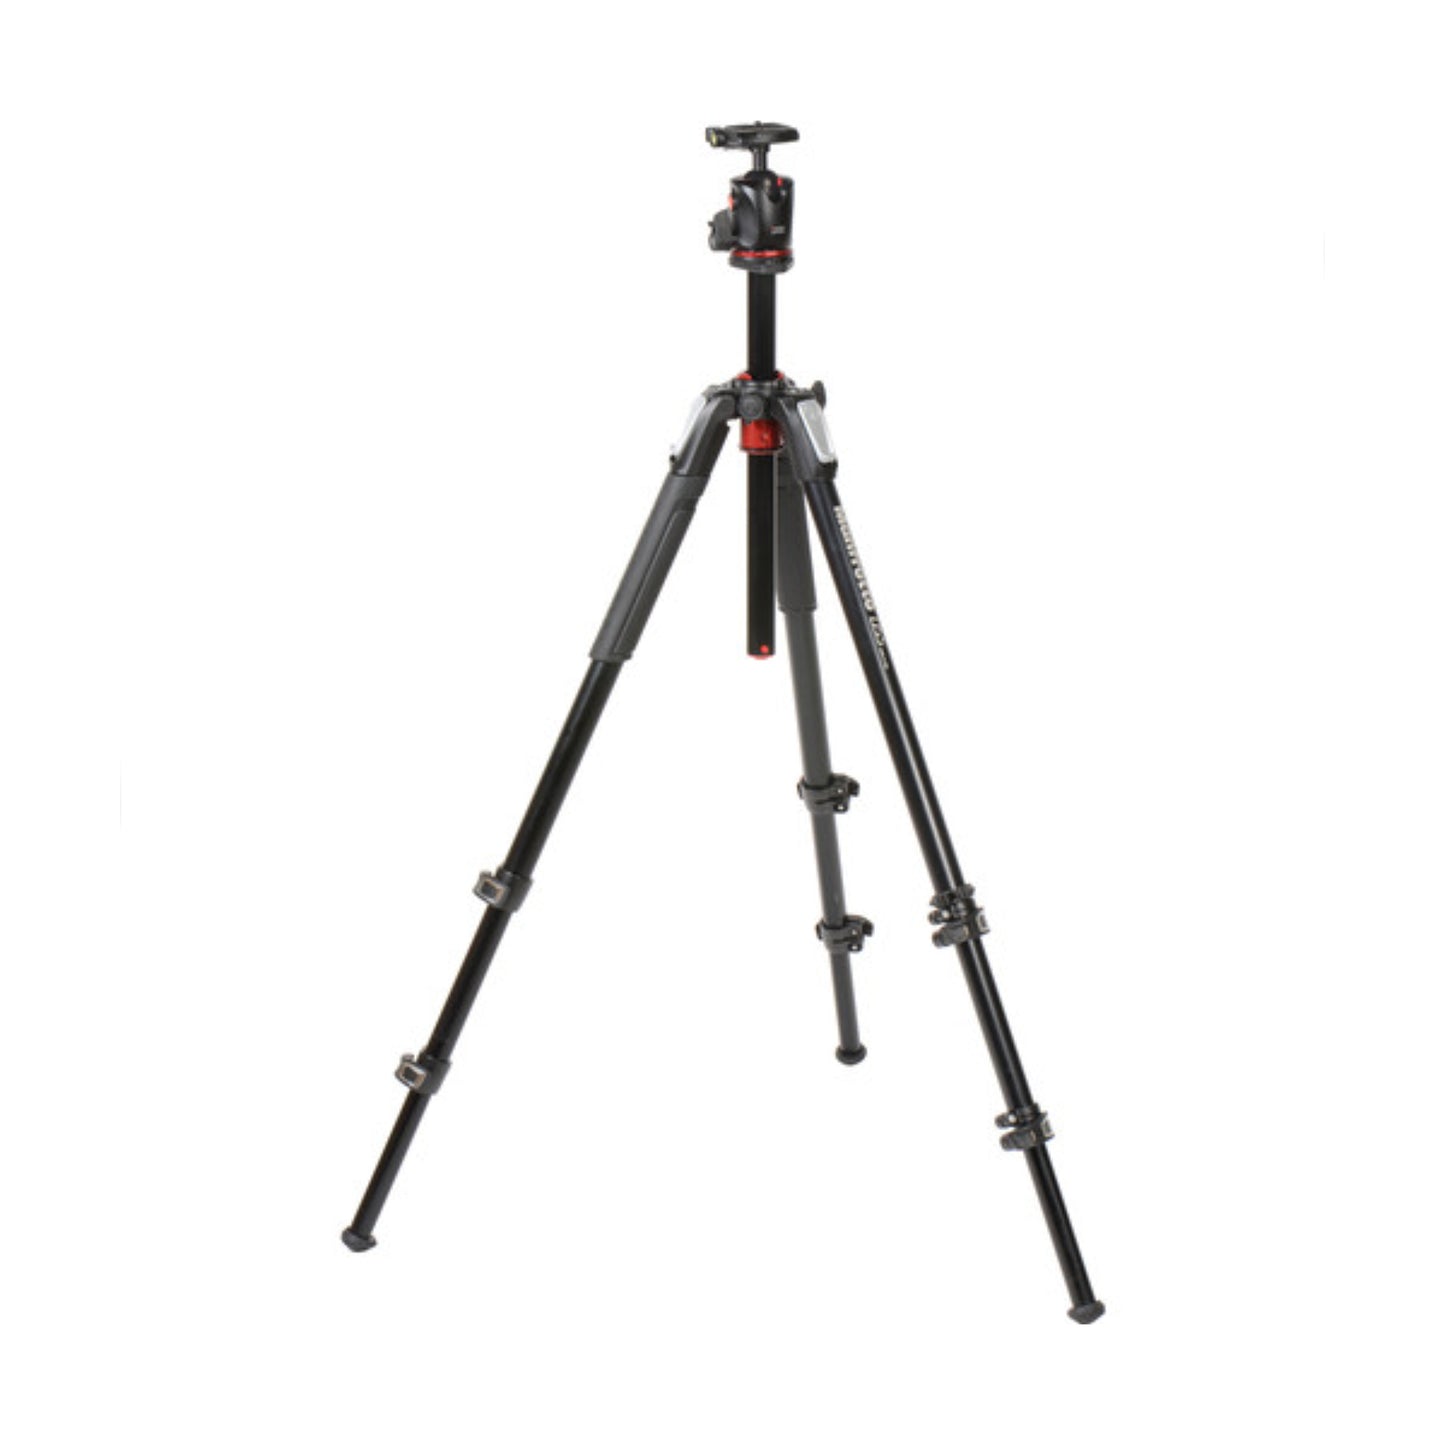 Manfrotto 055 Tripod with Ball head